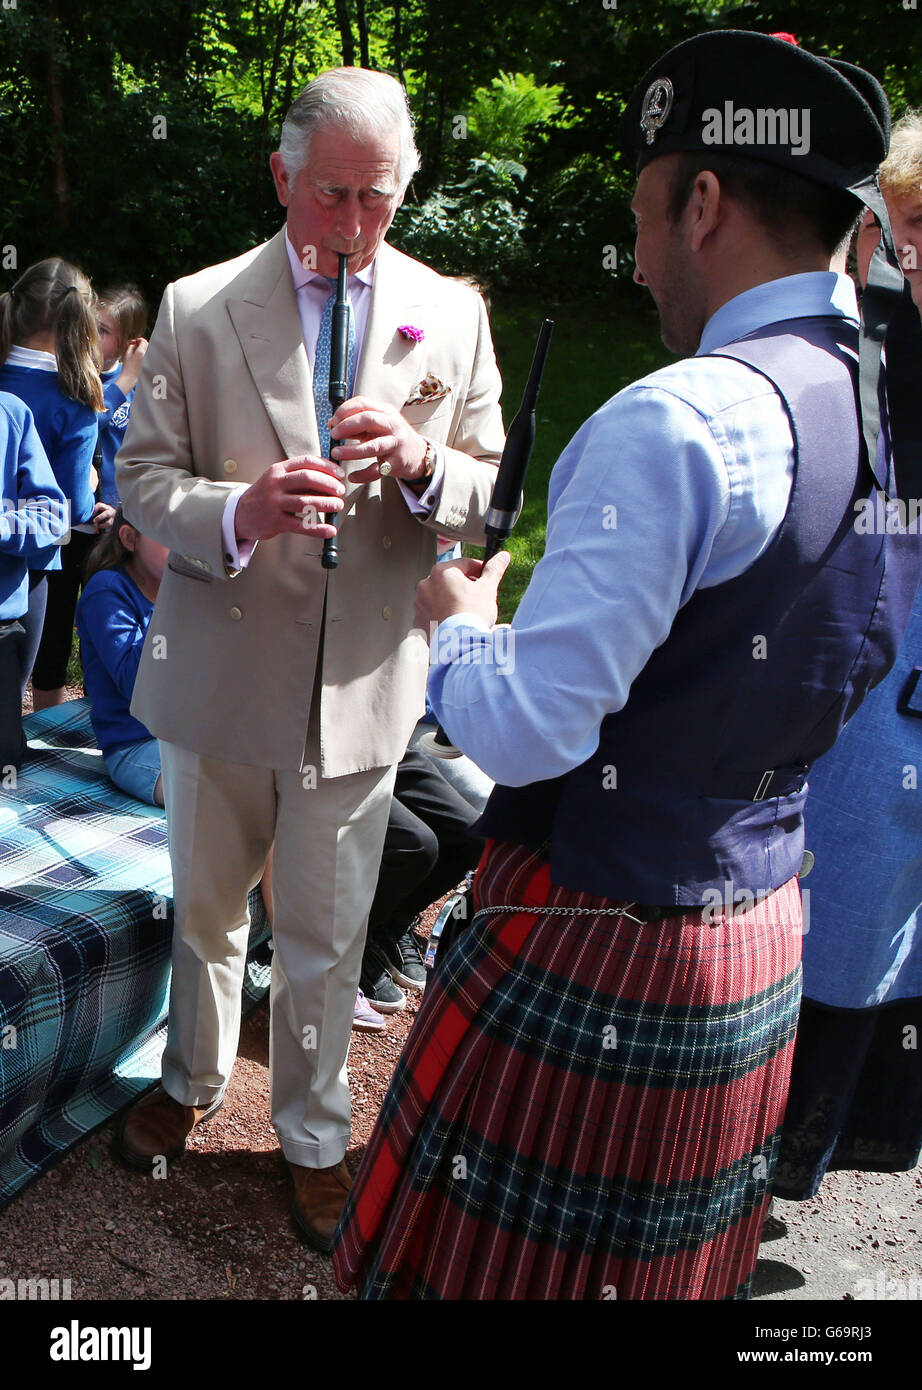 The Prince of Wales, known as the Duke of Rothesay while in Scotland, plays a chanter as he takes part in chanter lesson with local school children taught by Alisdair McLaren during his visit to the National Piping Centre at the Dumfries House Estate in Cumnock as it holds a 'Come and Try' workshop. Stock Photo